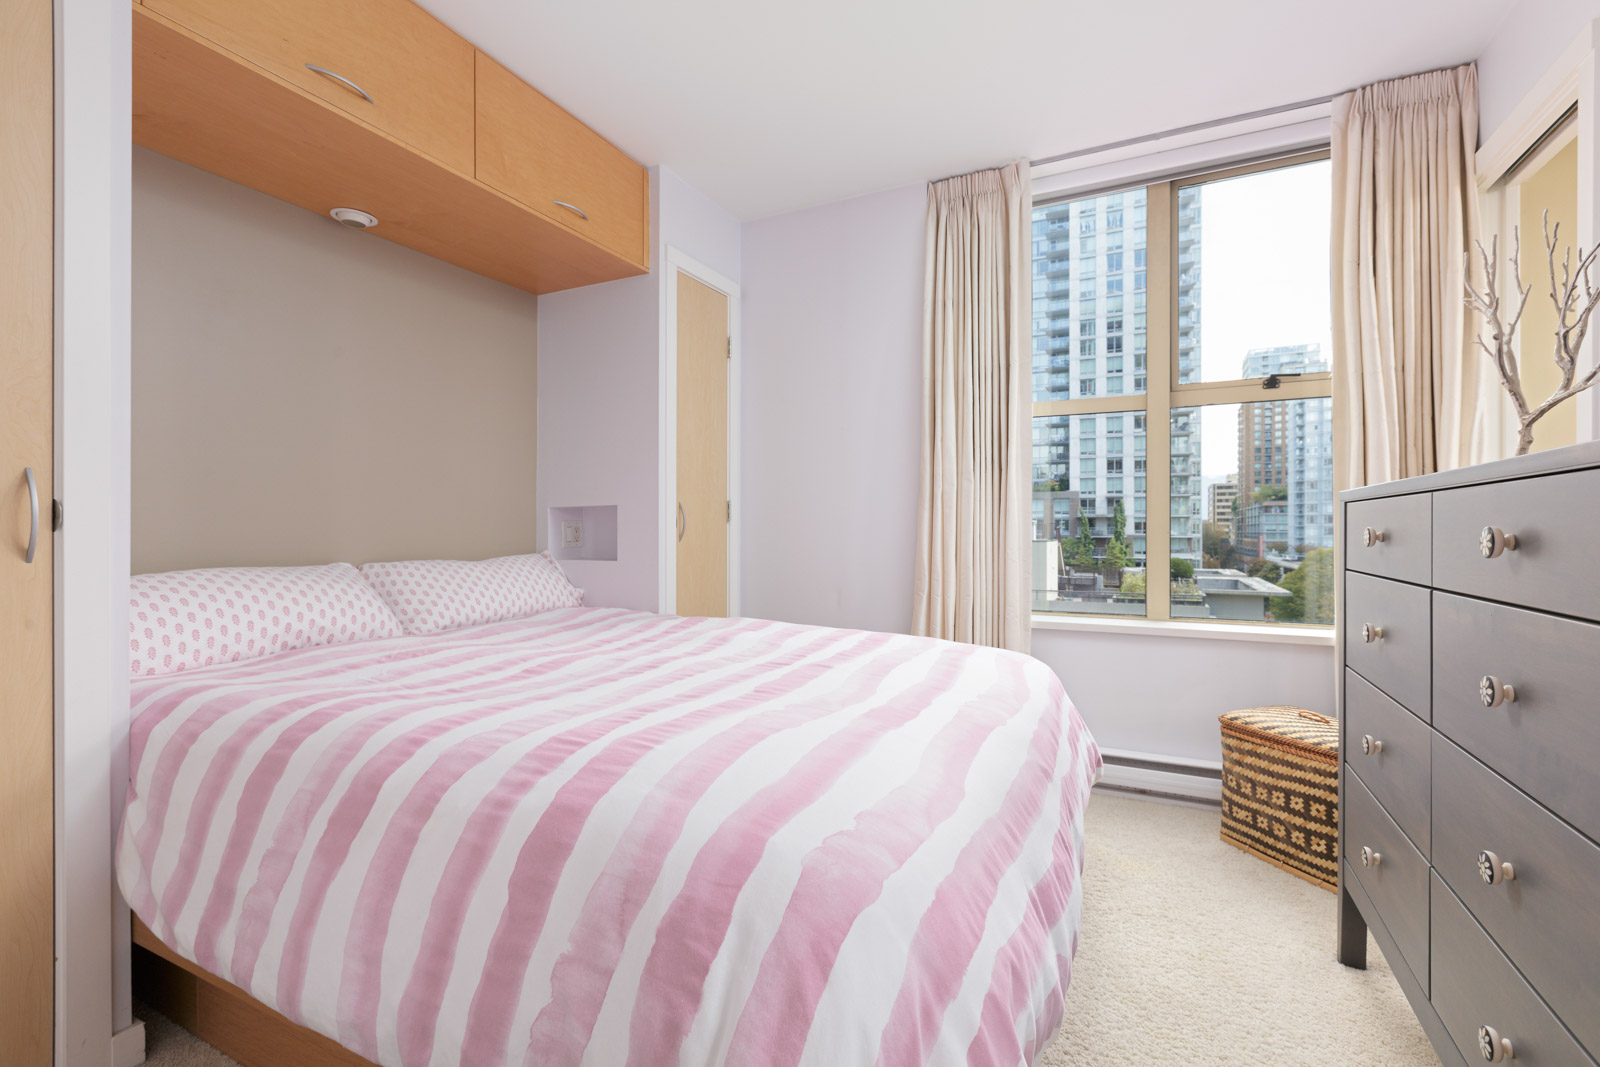 furnished bedroom in Yaletown condo with pink bedding